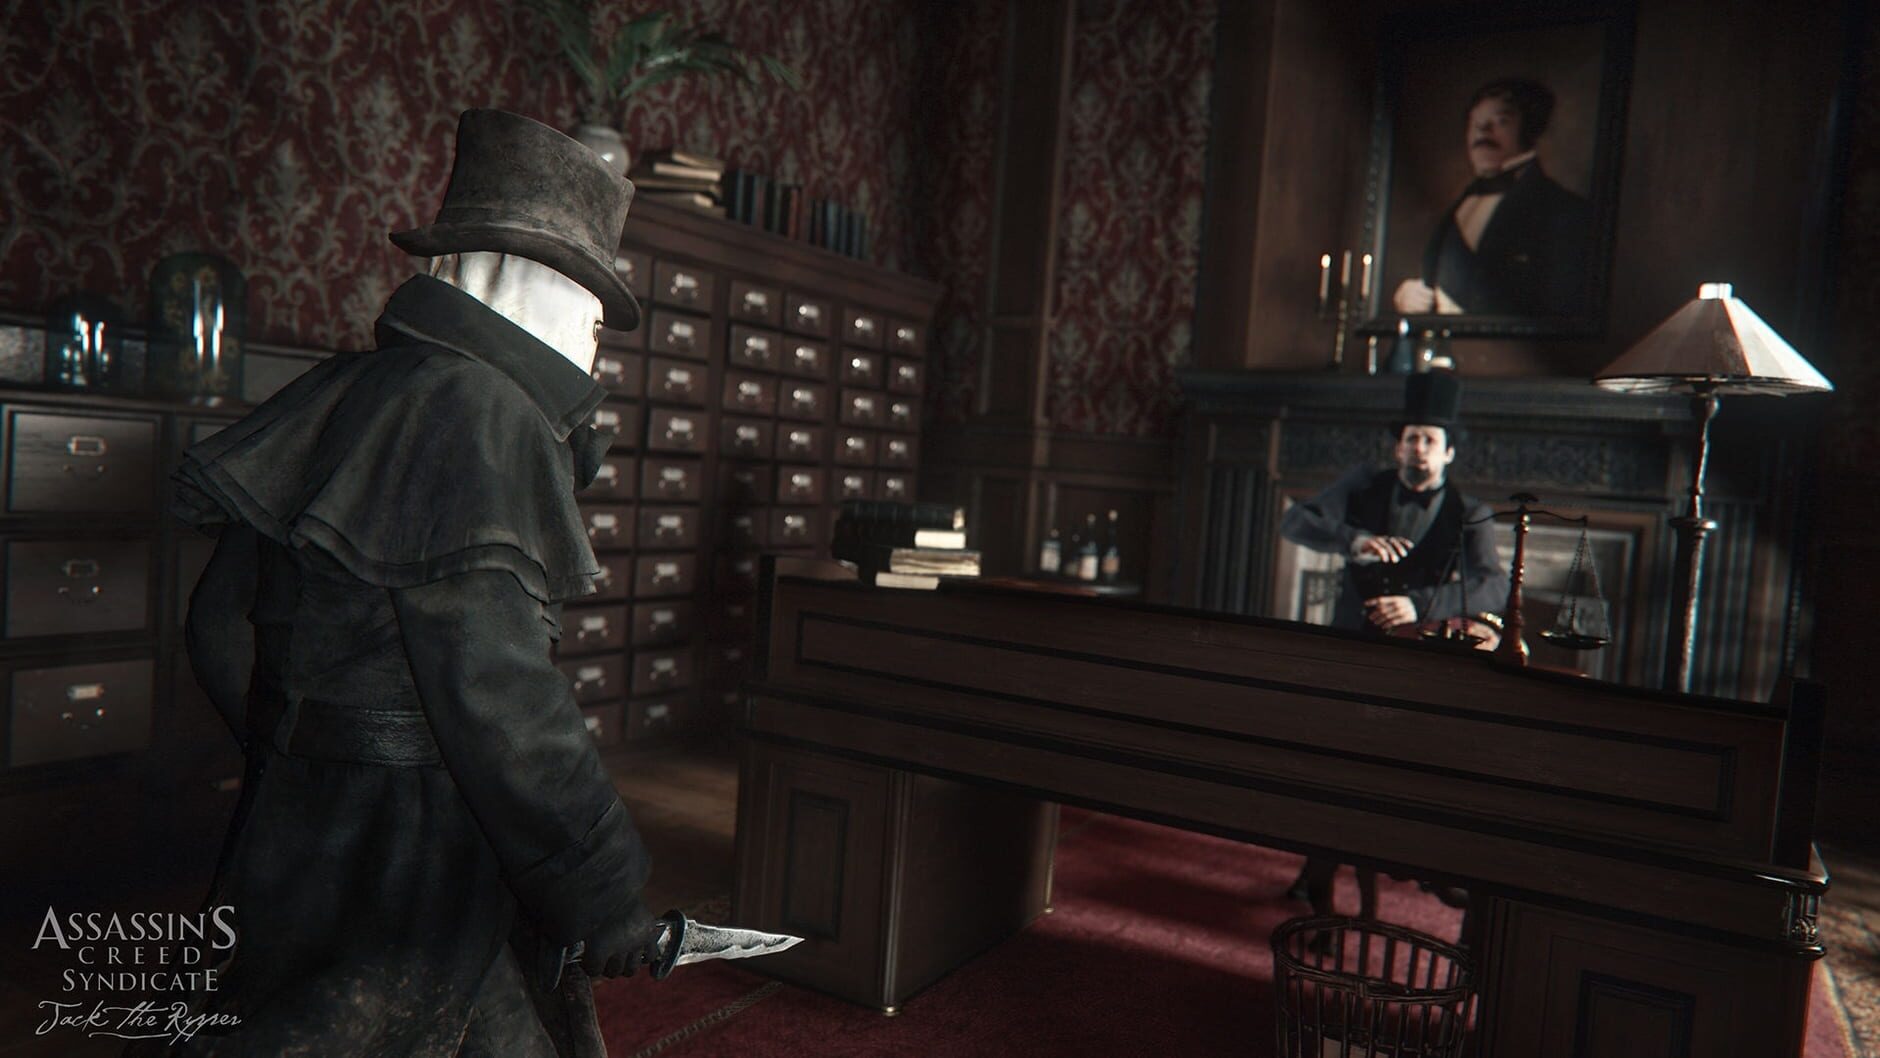 Screenshot for Assassin's Creed Syndicate: Jack the Ripper